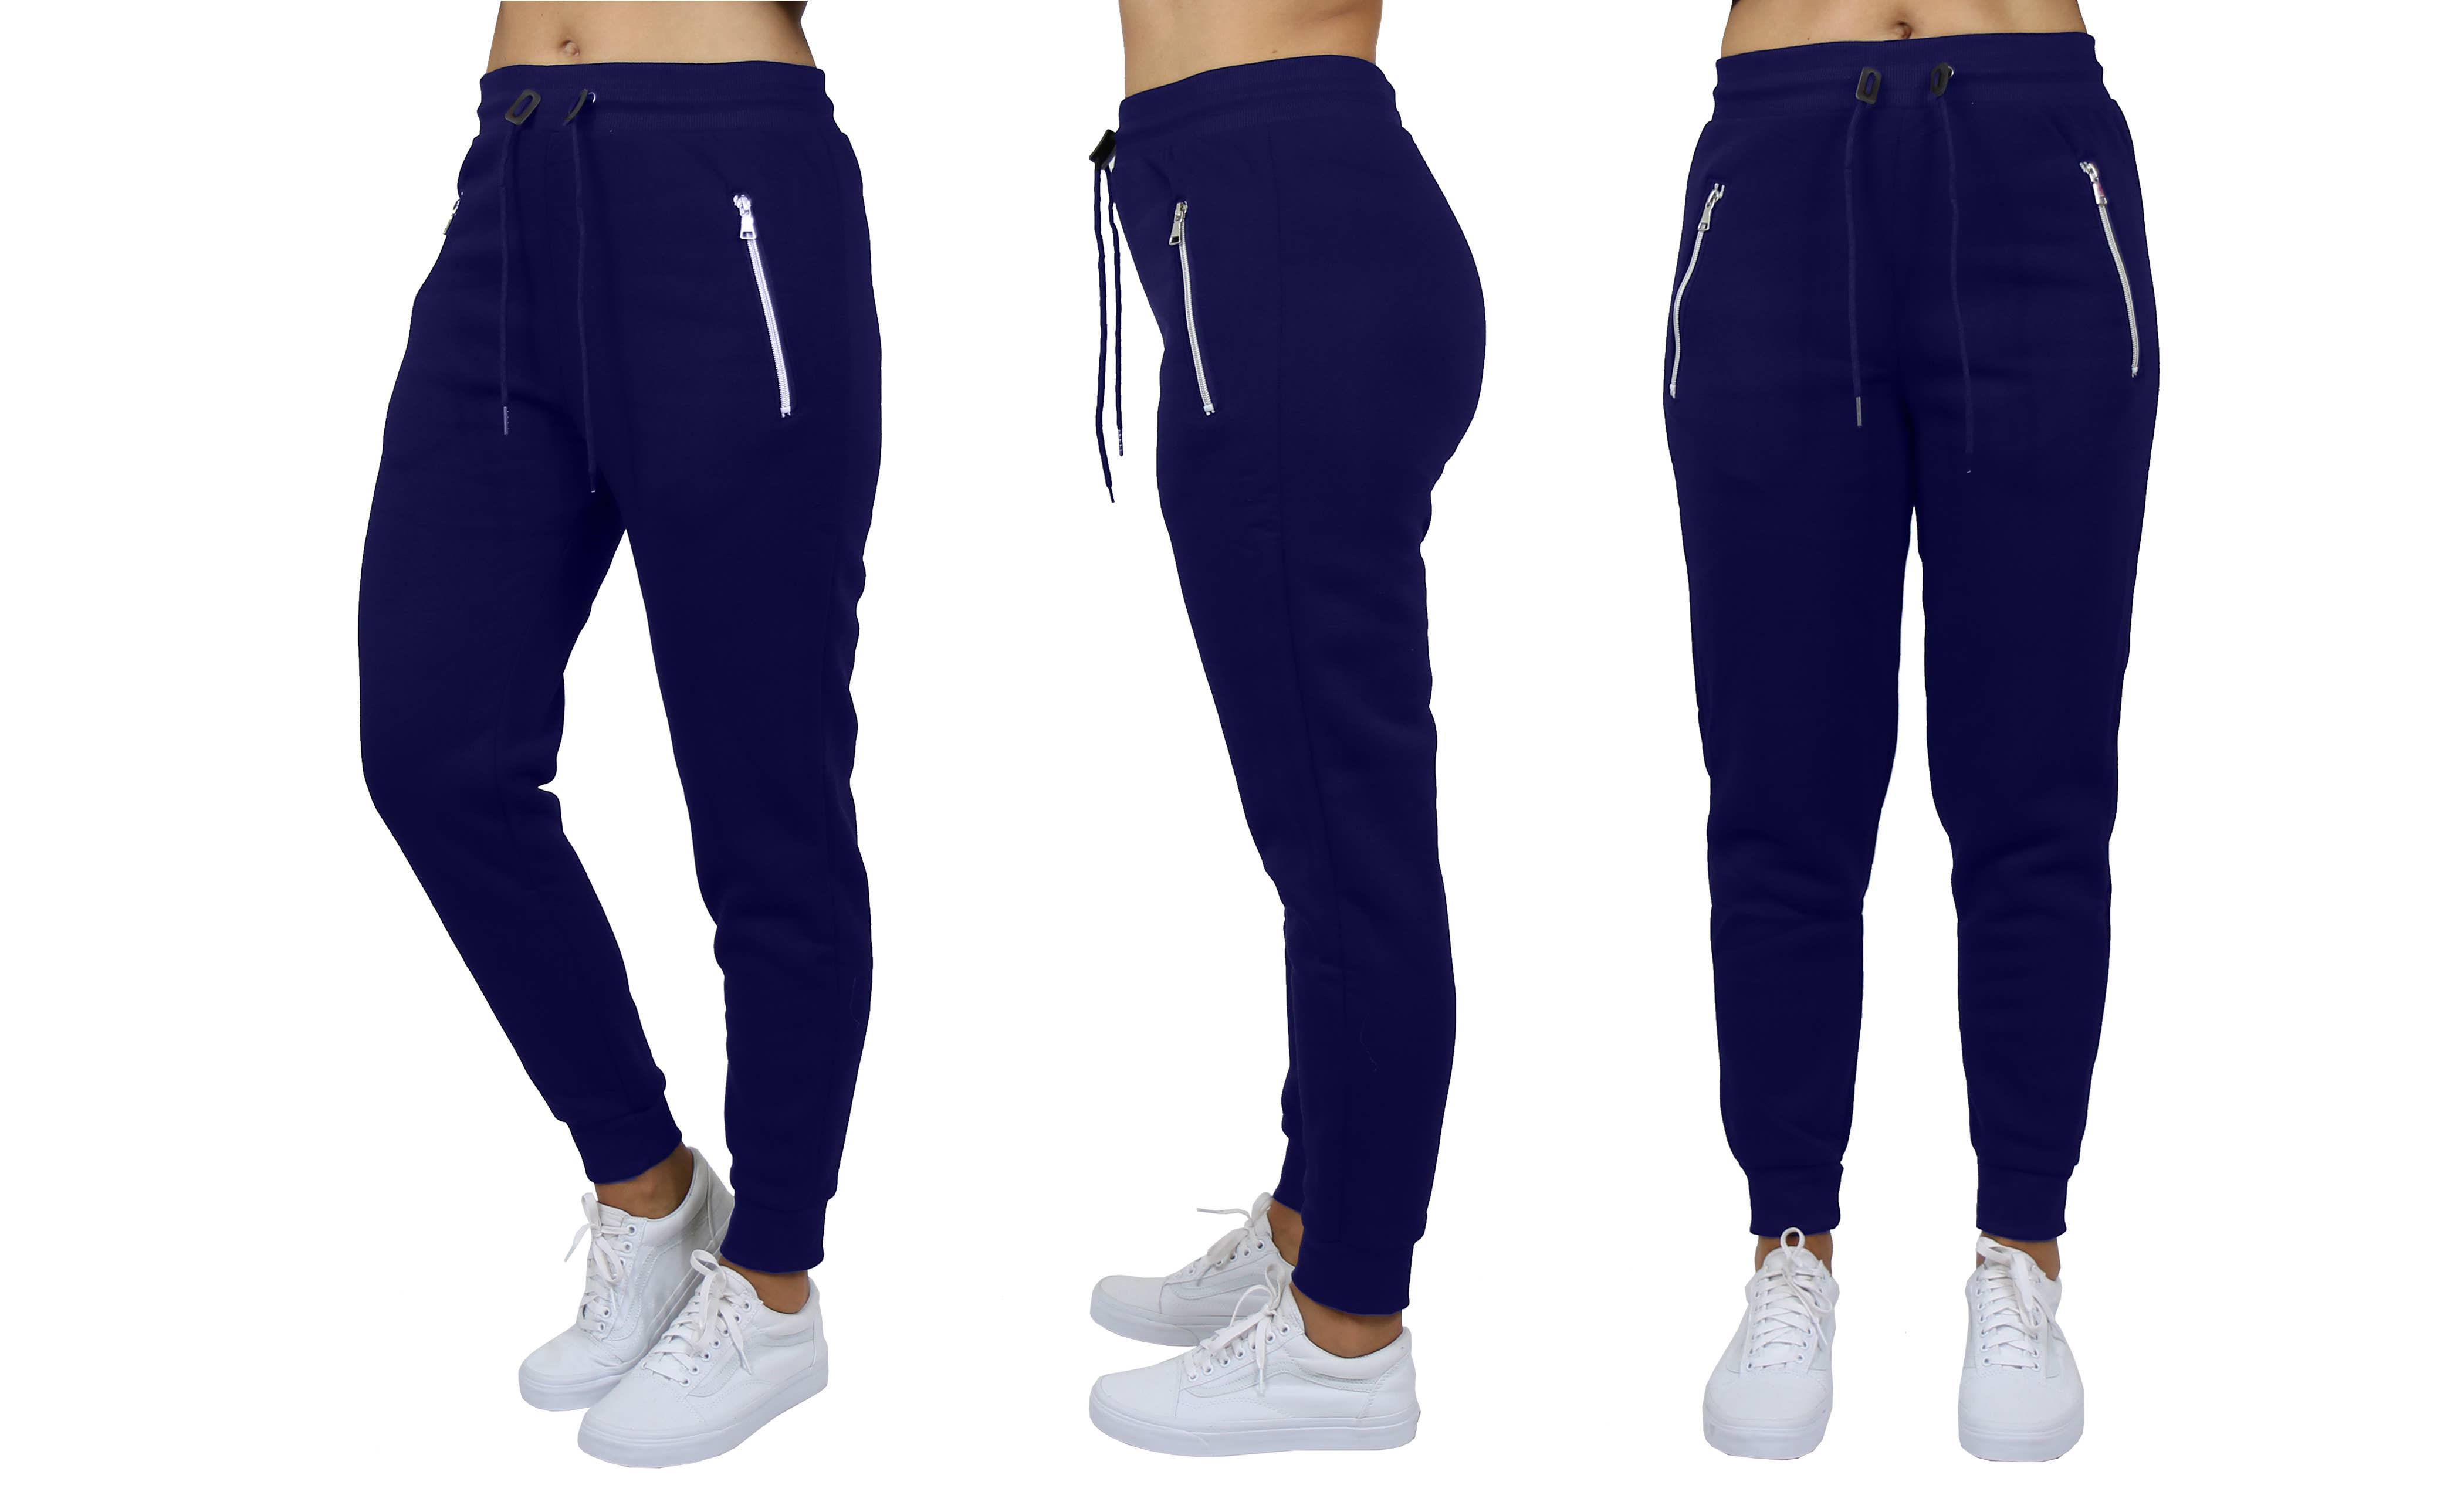 Women's Loose Fit Jogger Pants With Zipper Pockets